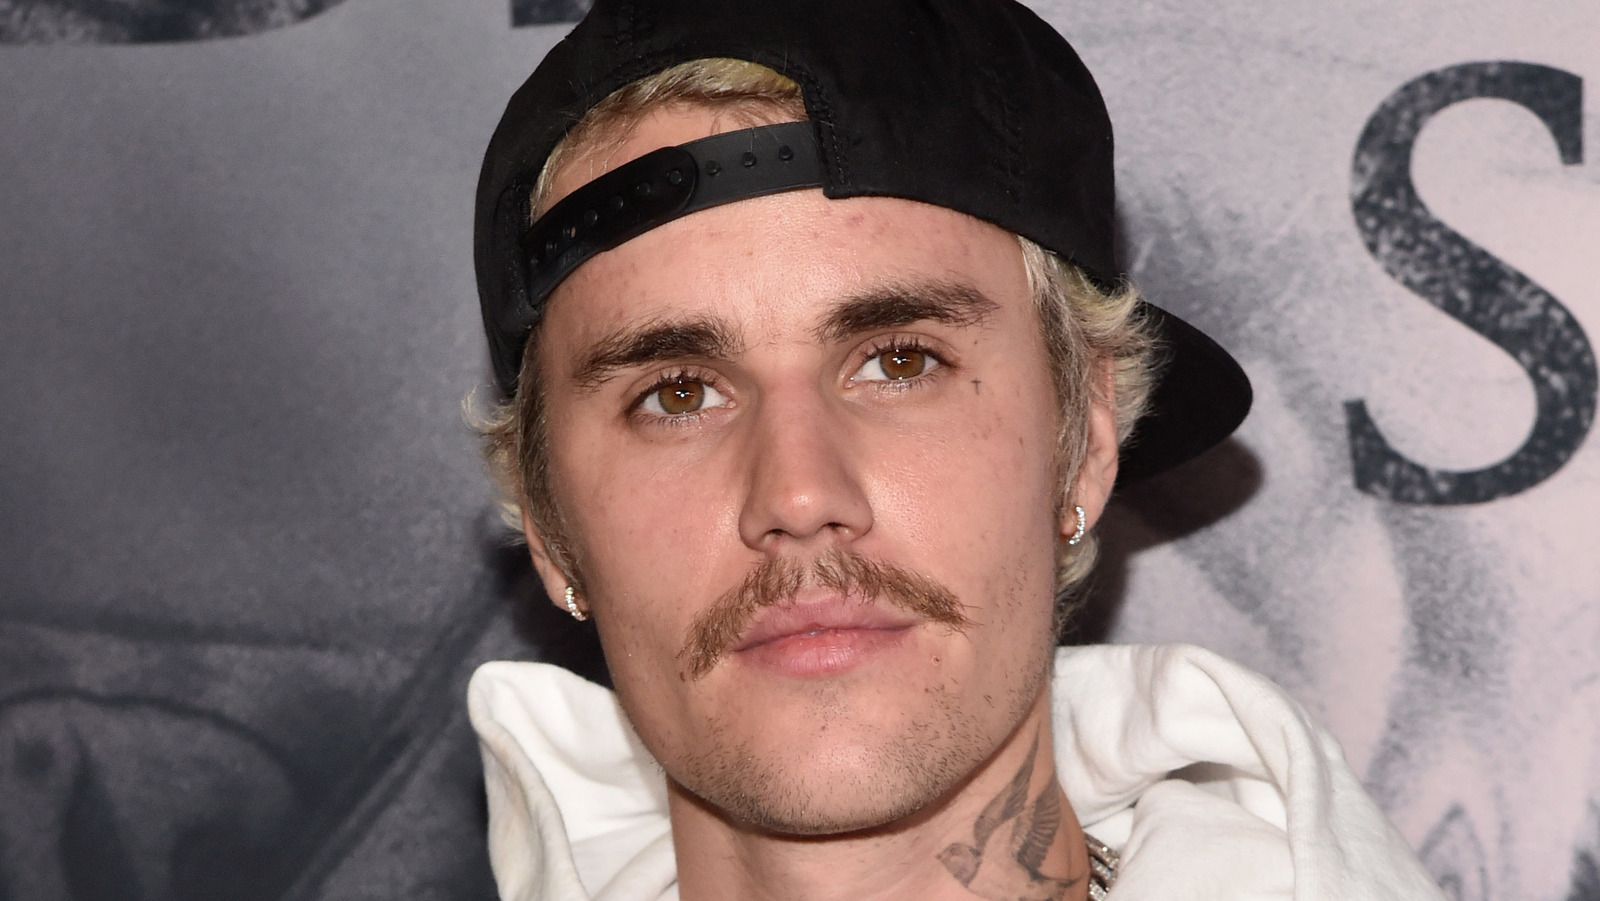 Justin Bieber wants to heal this broken planet with his new album